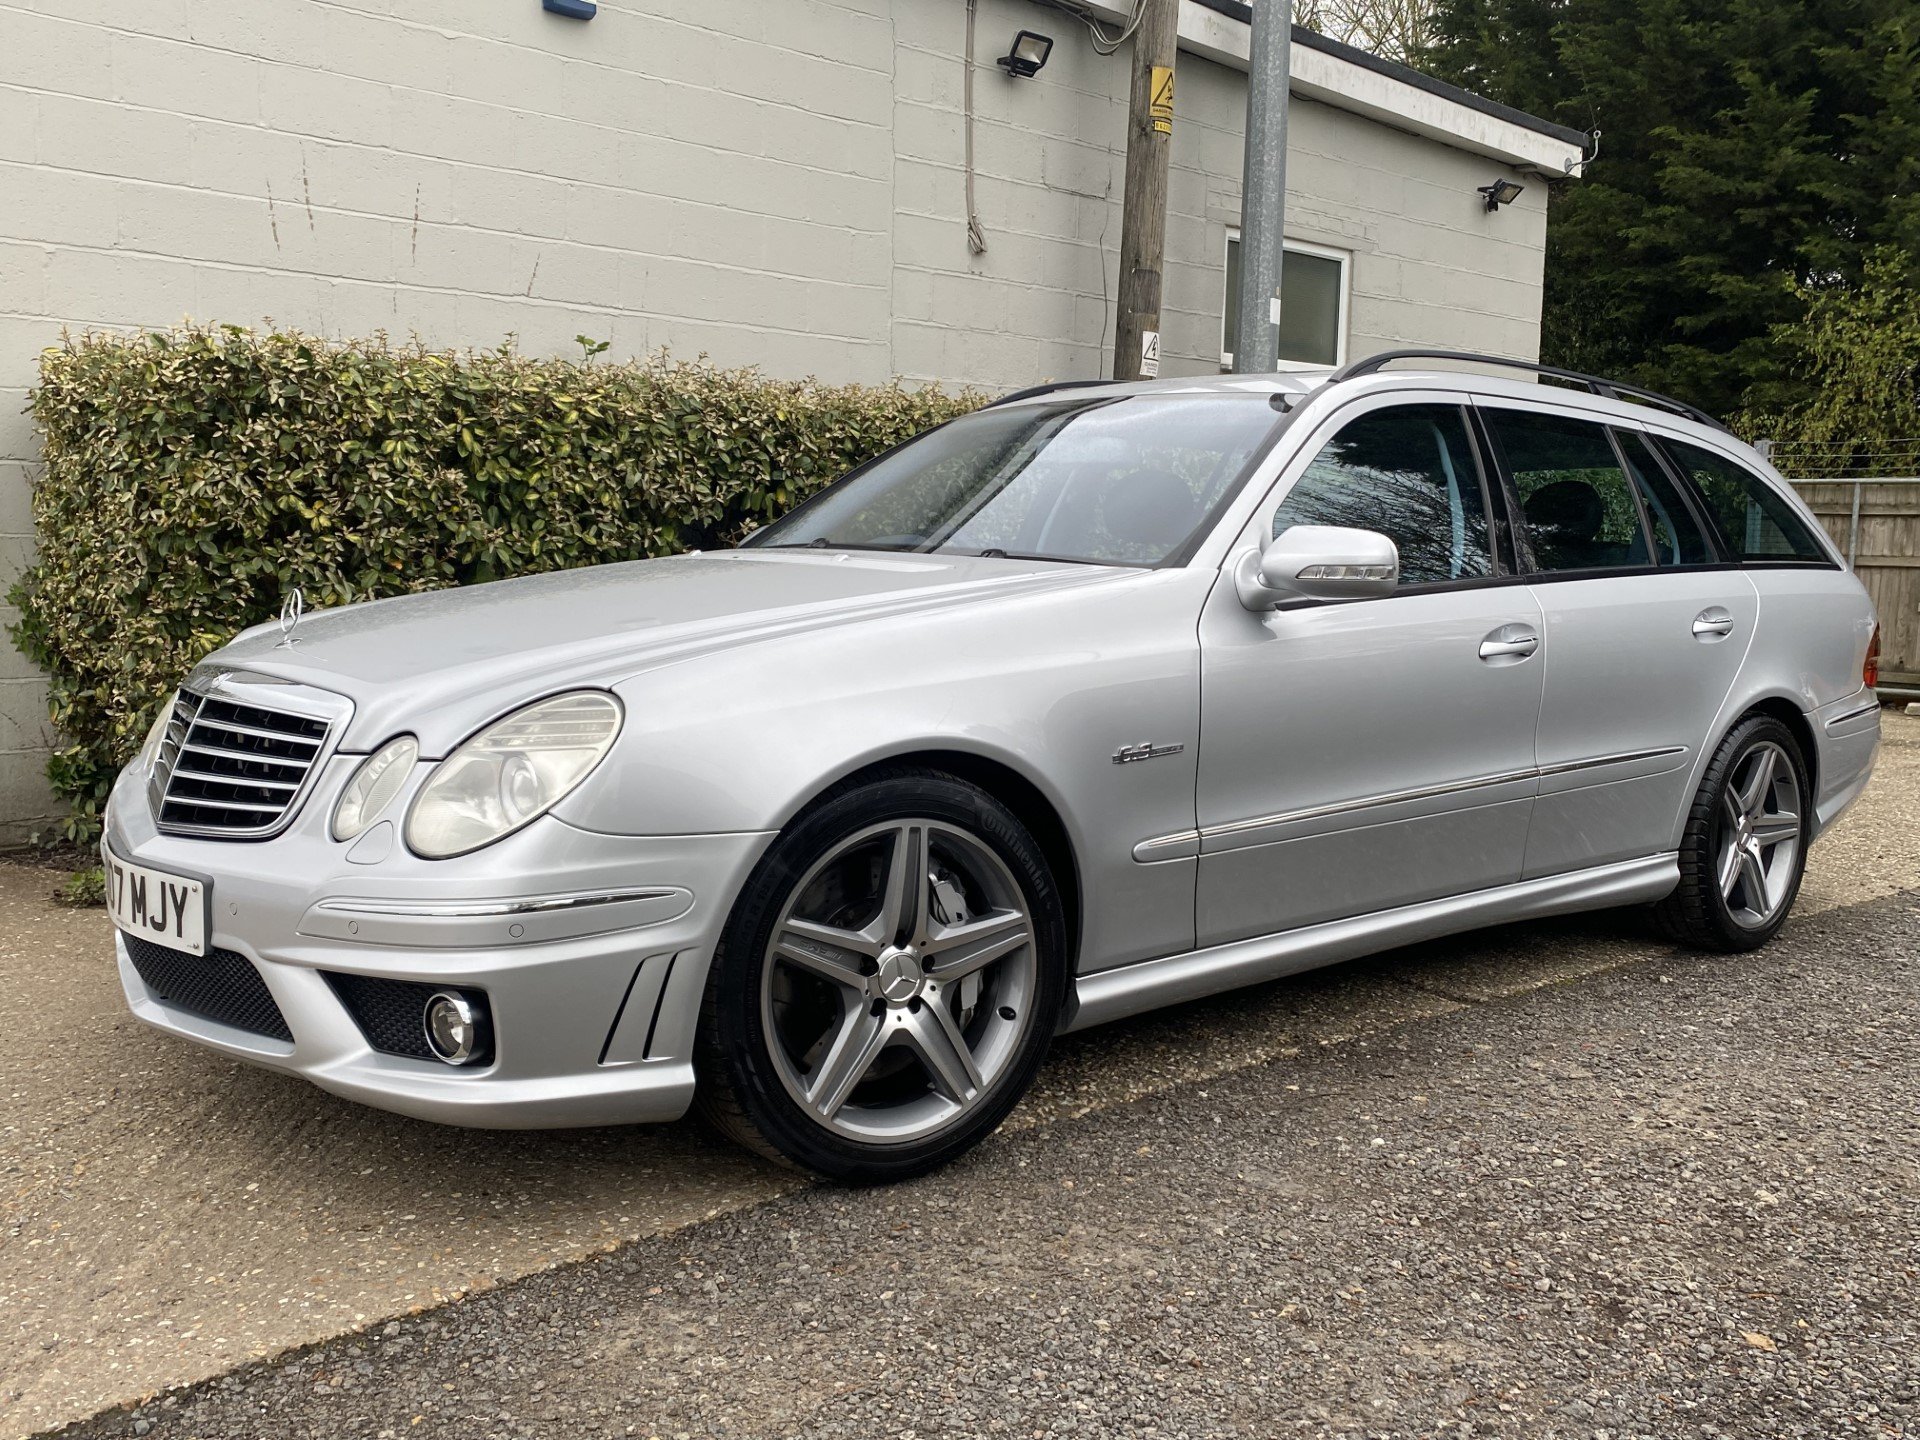 Mercedes E63 AMG (W211) - Only 48k Miles